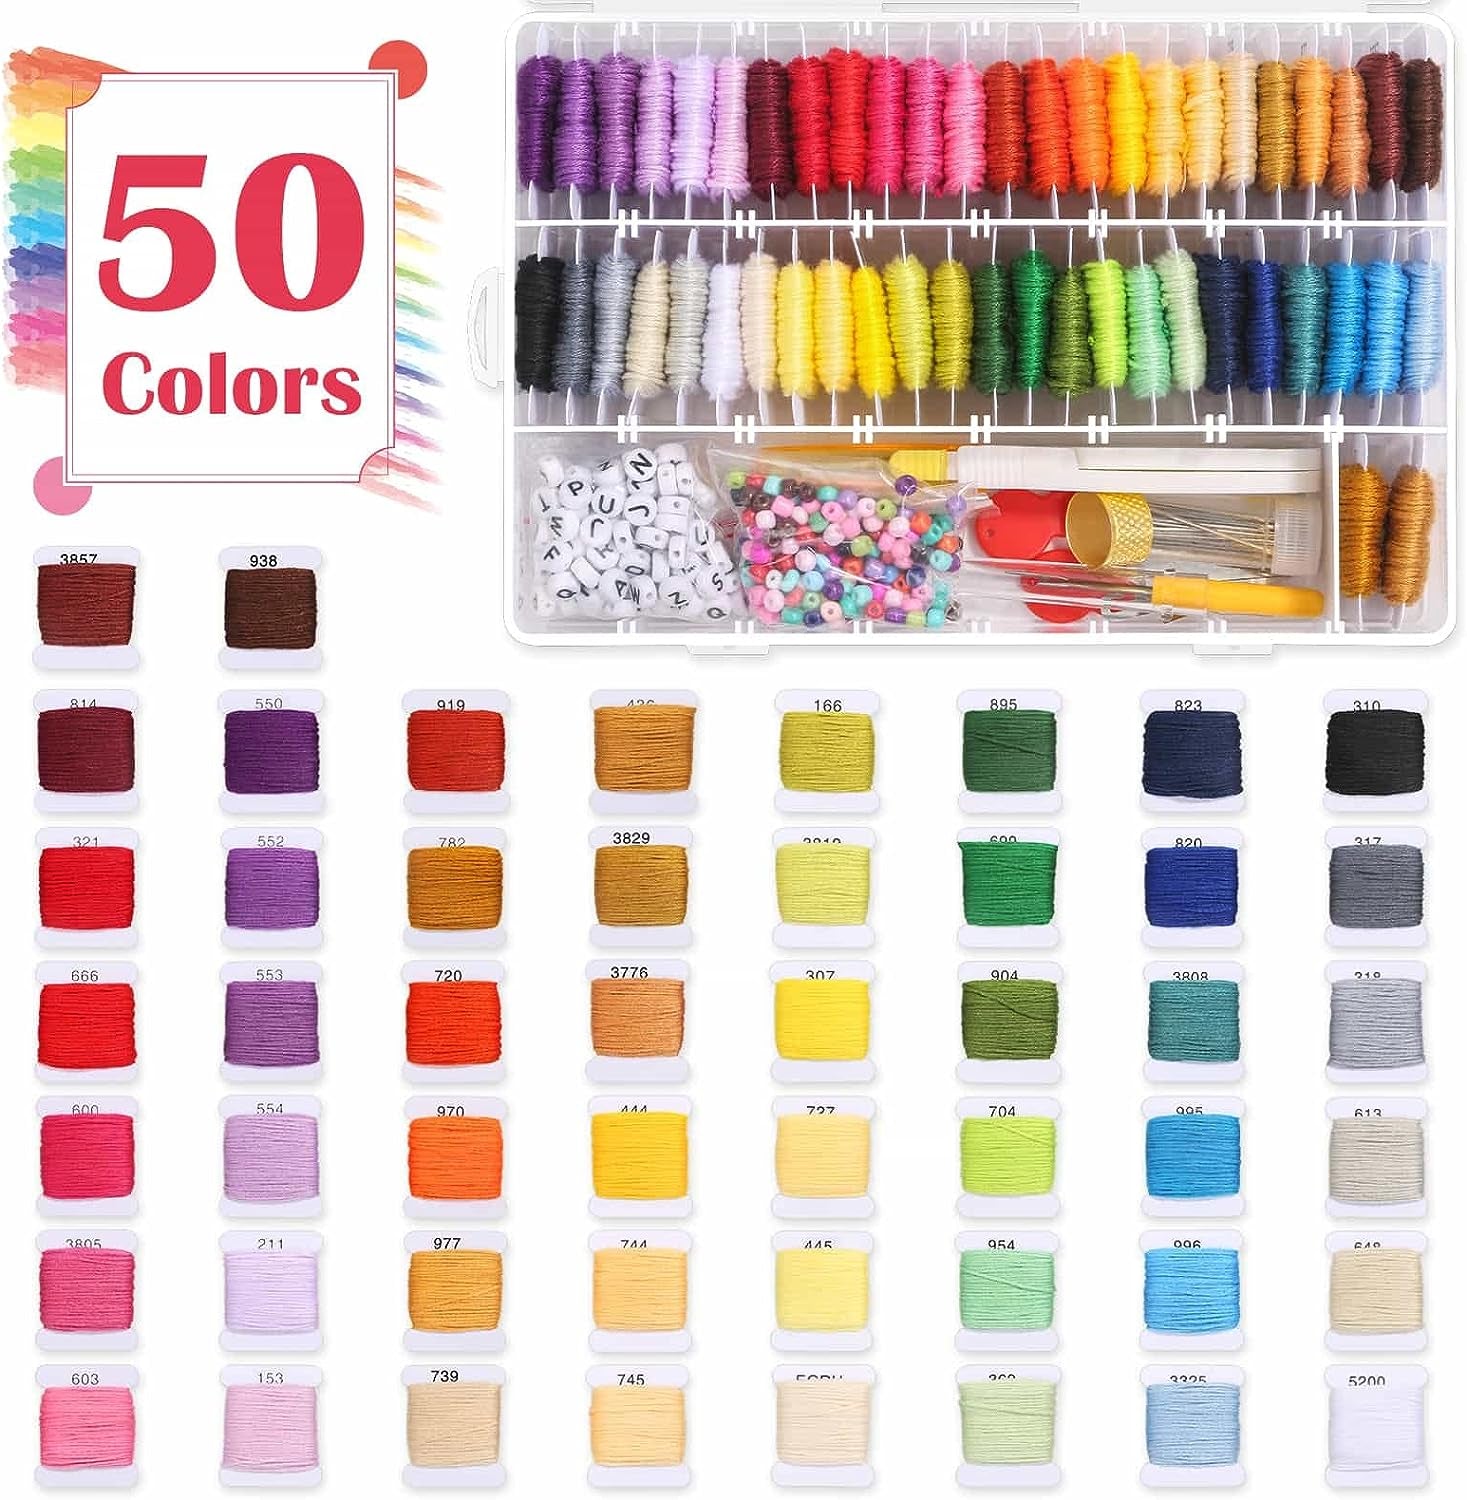 488Pcs String Bracelet Making Kit, Friendship Bracelet String Kit with 50 Skeins Embroidery Floss Cross Stitch Thread, 400Pcs Friendship Bracelet Beads, 37Pcs Embroidery Tools